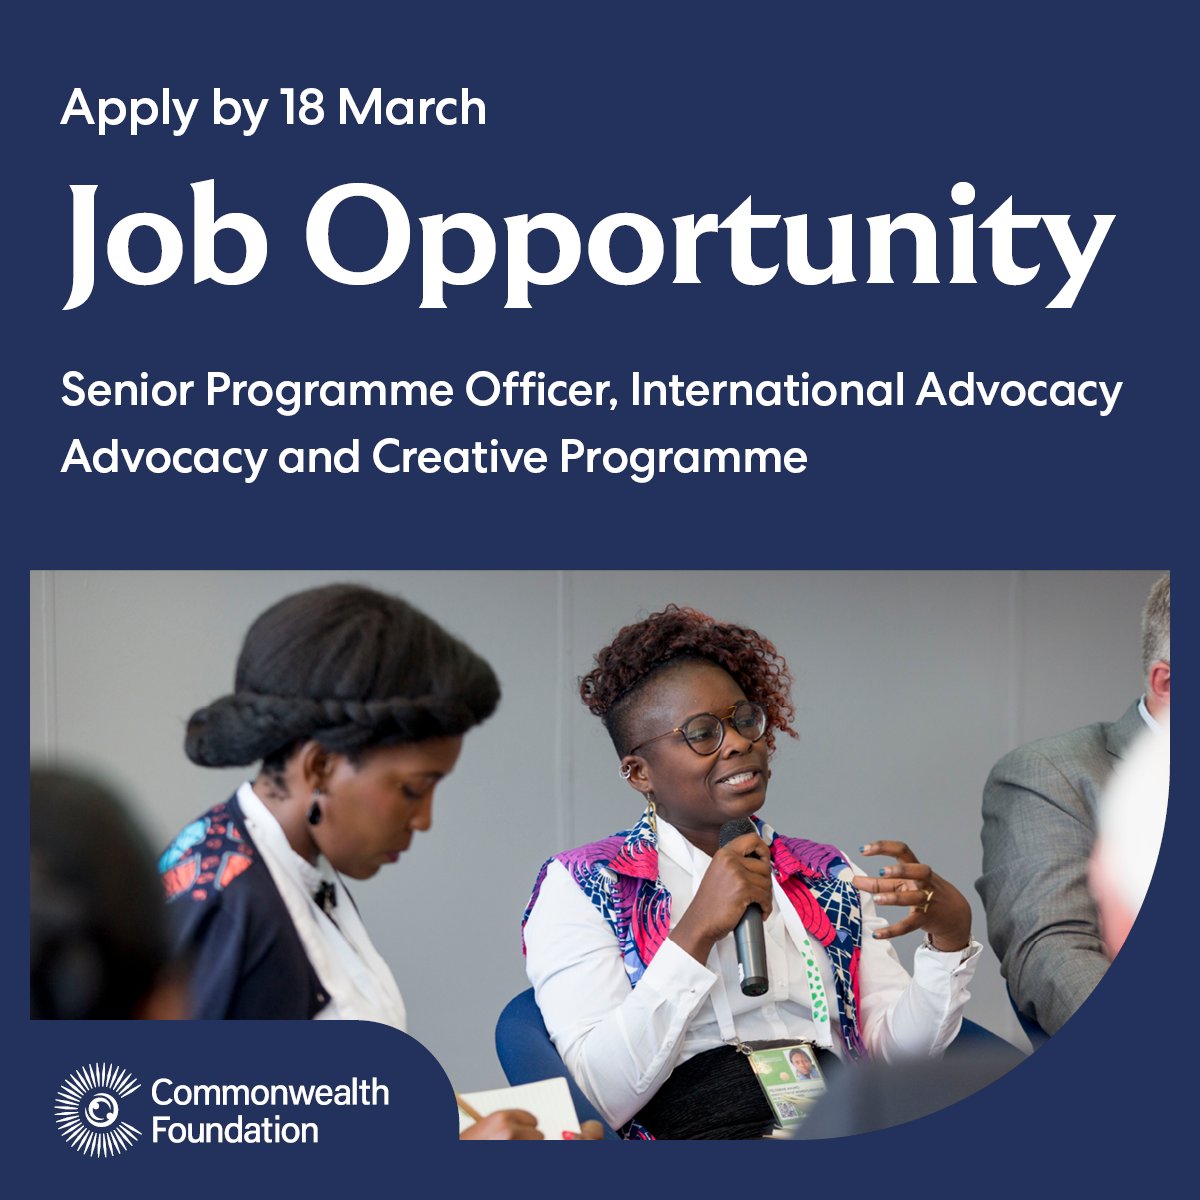 Join us as the Senior Programme Officer for International Advocacy, and amplify citizens' voices in debates on health, climate justice, and freedom of expression 👐 Applicants must have an existing right to work in the United Kingdom. 👇 bit.ly/4bTlmZc